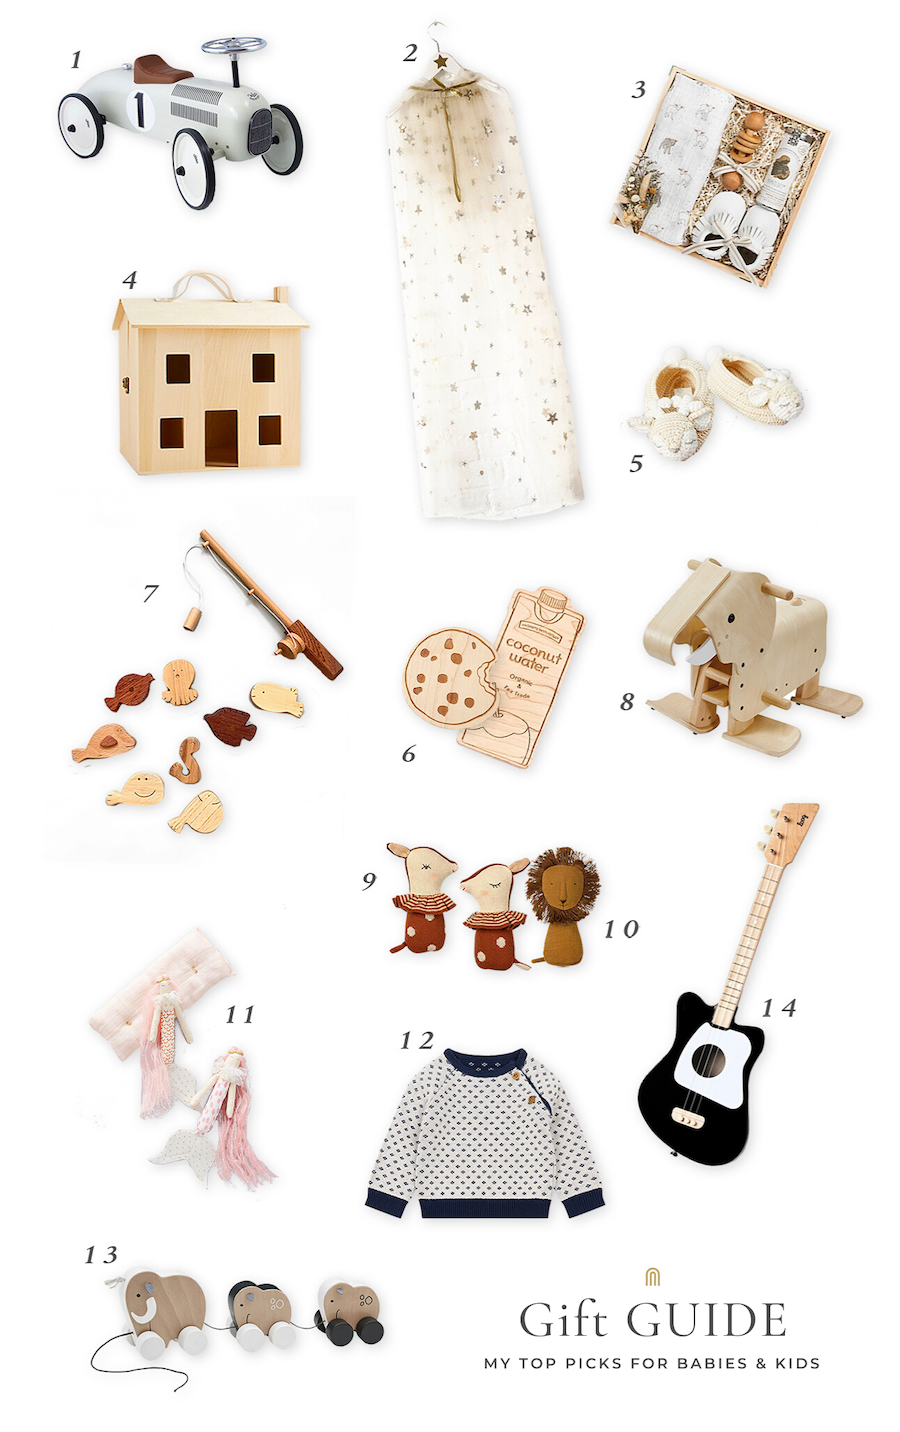 Holiday gift guide for baby and kids